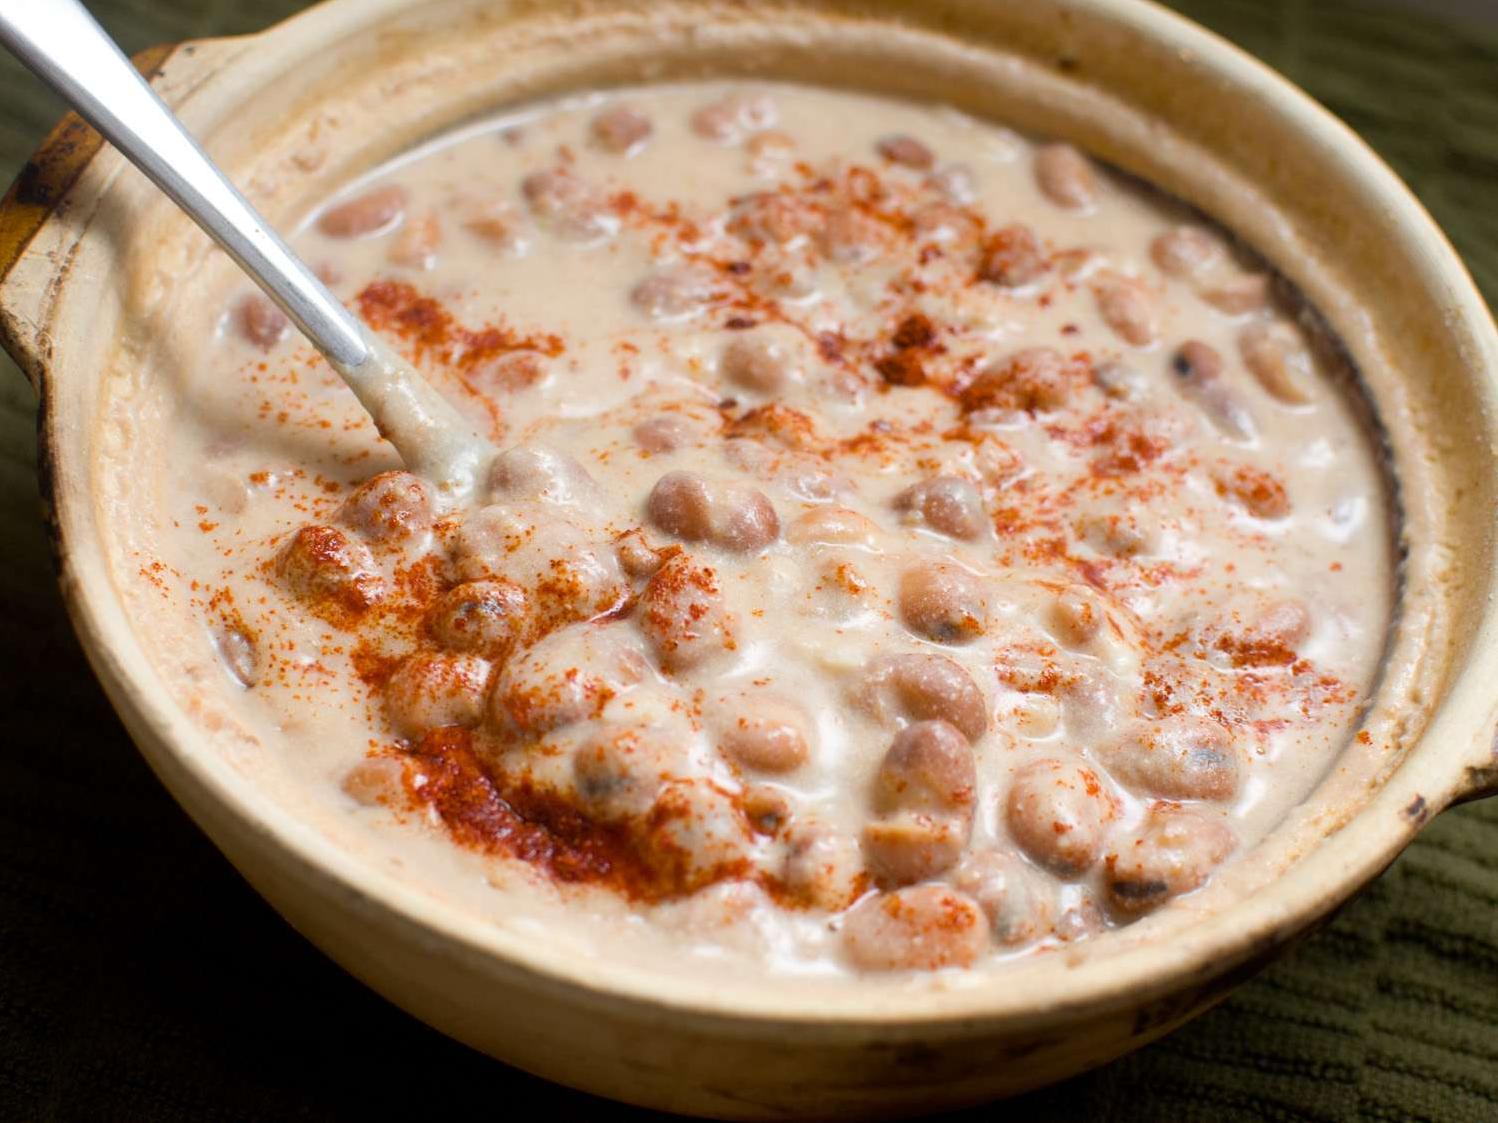  This fava bean dip is a twist on traditional hummus and sure to impress your guests.